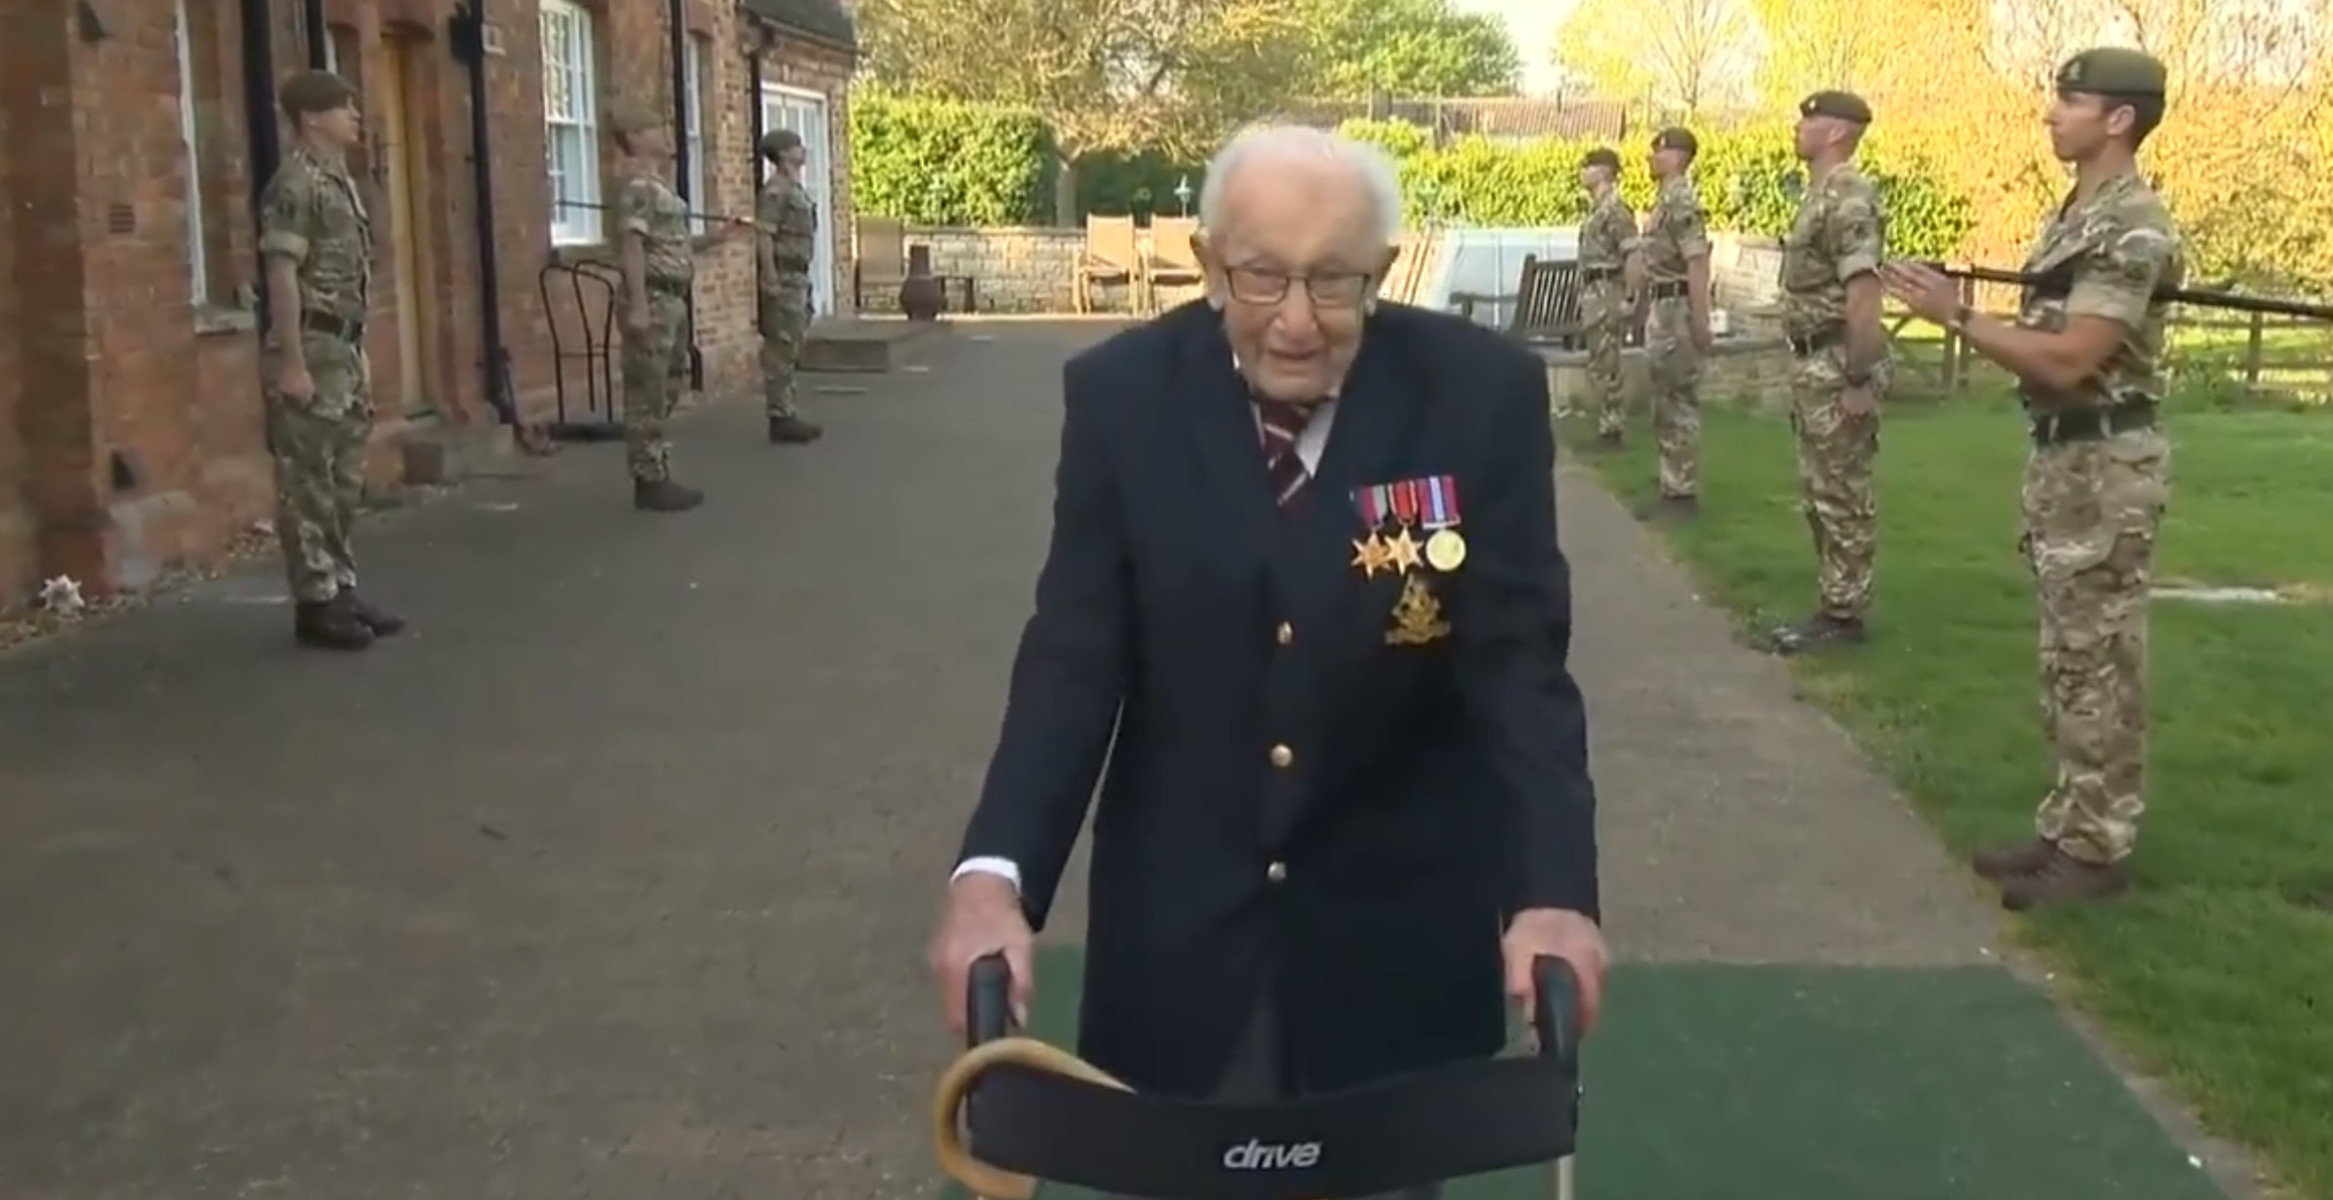 The Ministry of Defence tweeted its congratulations as he finished his walk